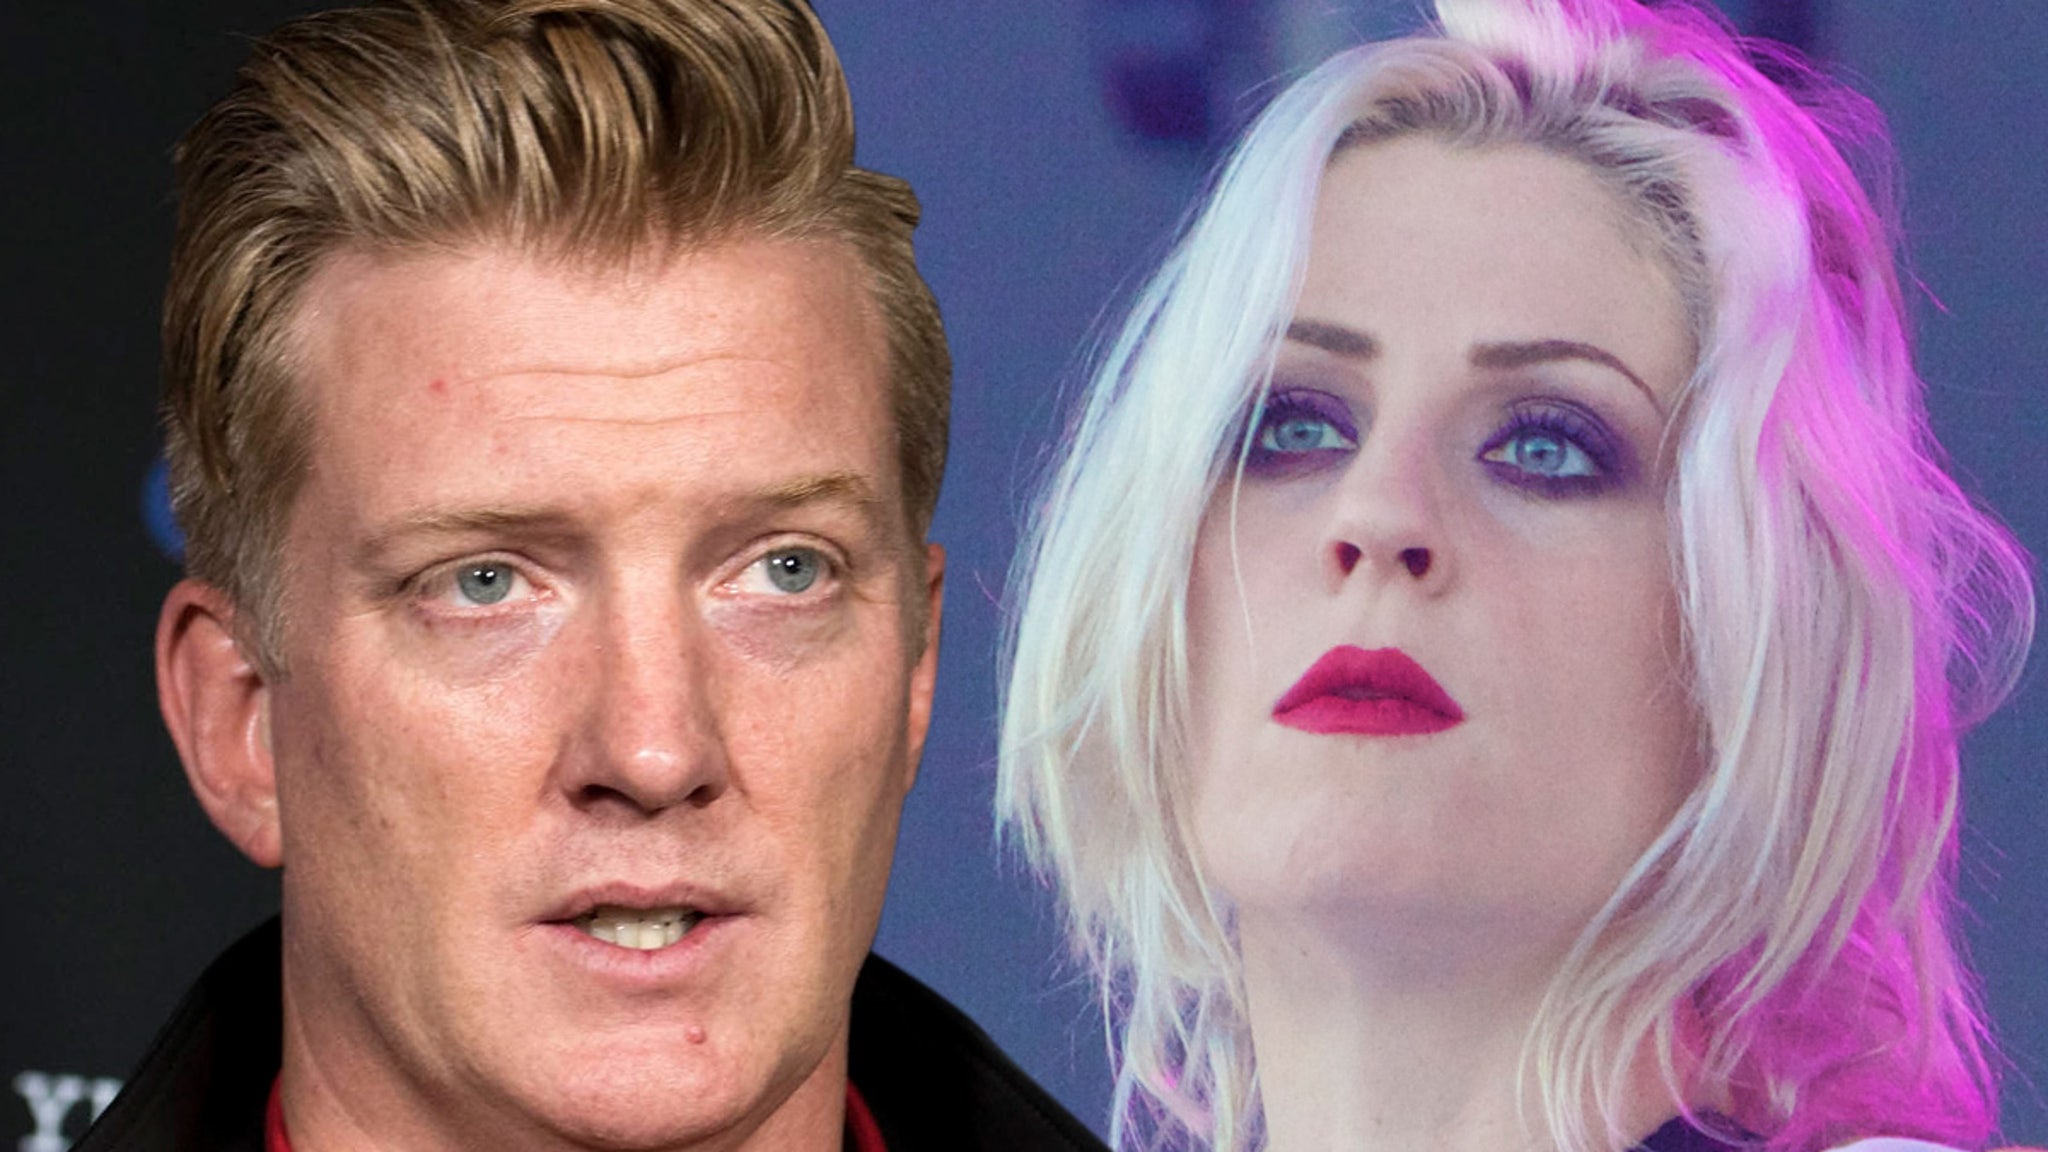 Queens of the Stone Age Singer Josh Homme Gets Restraining Order